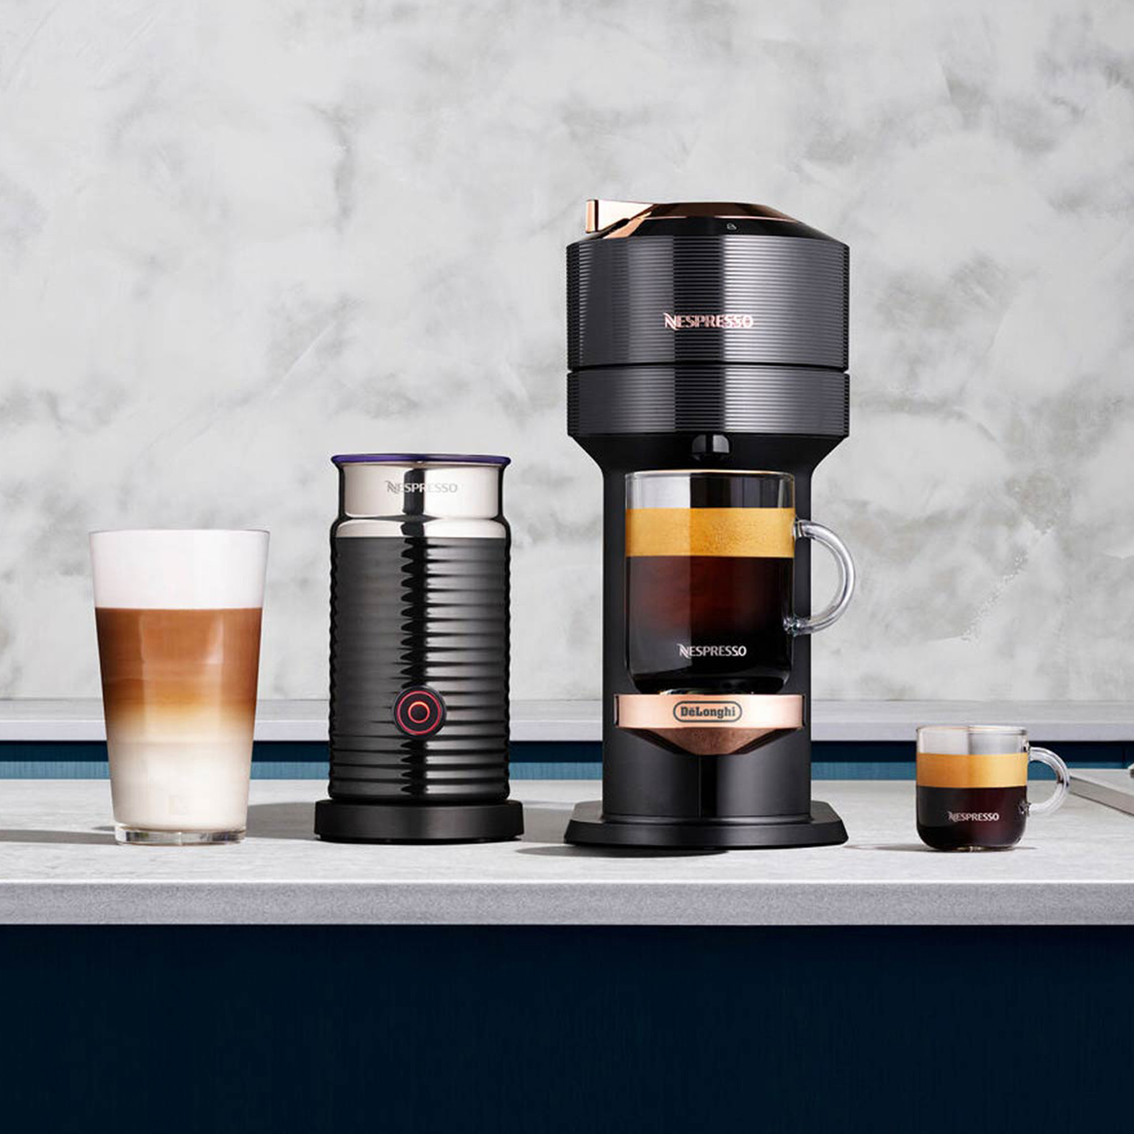 Nespresso by De'Longhi Premium Coffee and Espresso Maker with Milk Frother - Image 5 of 7